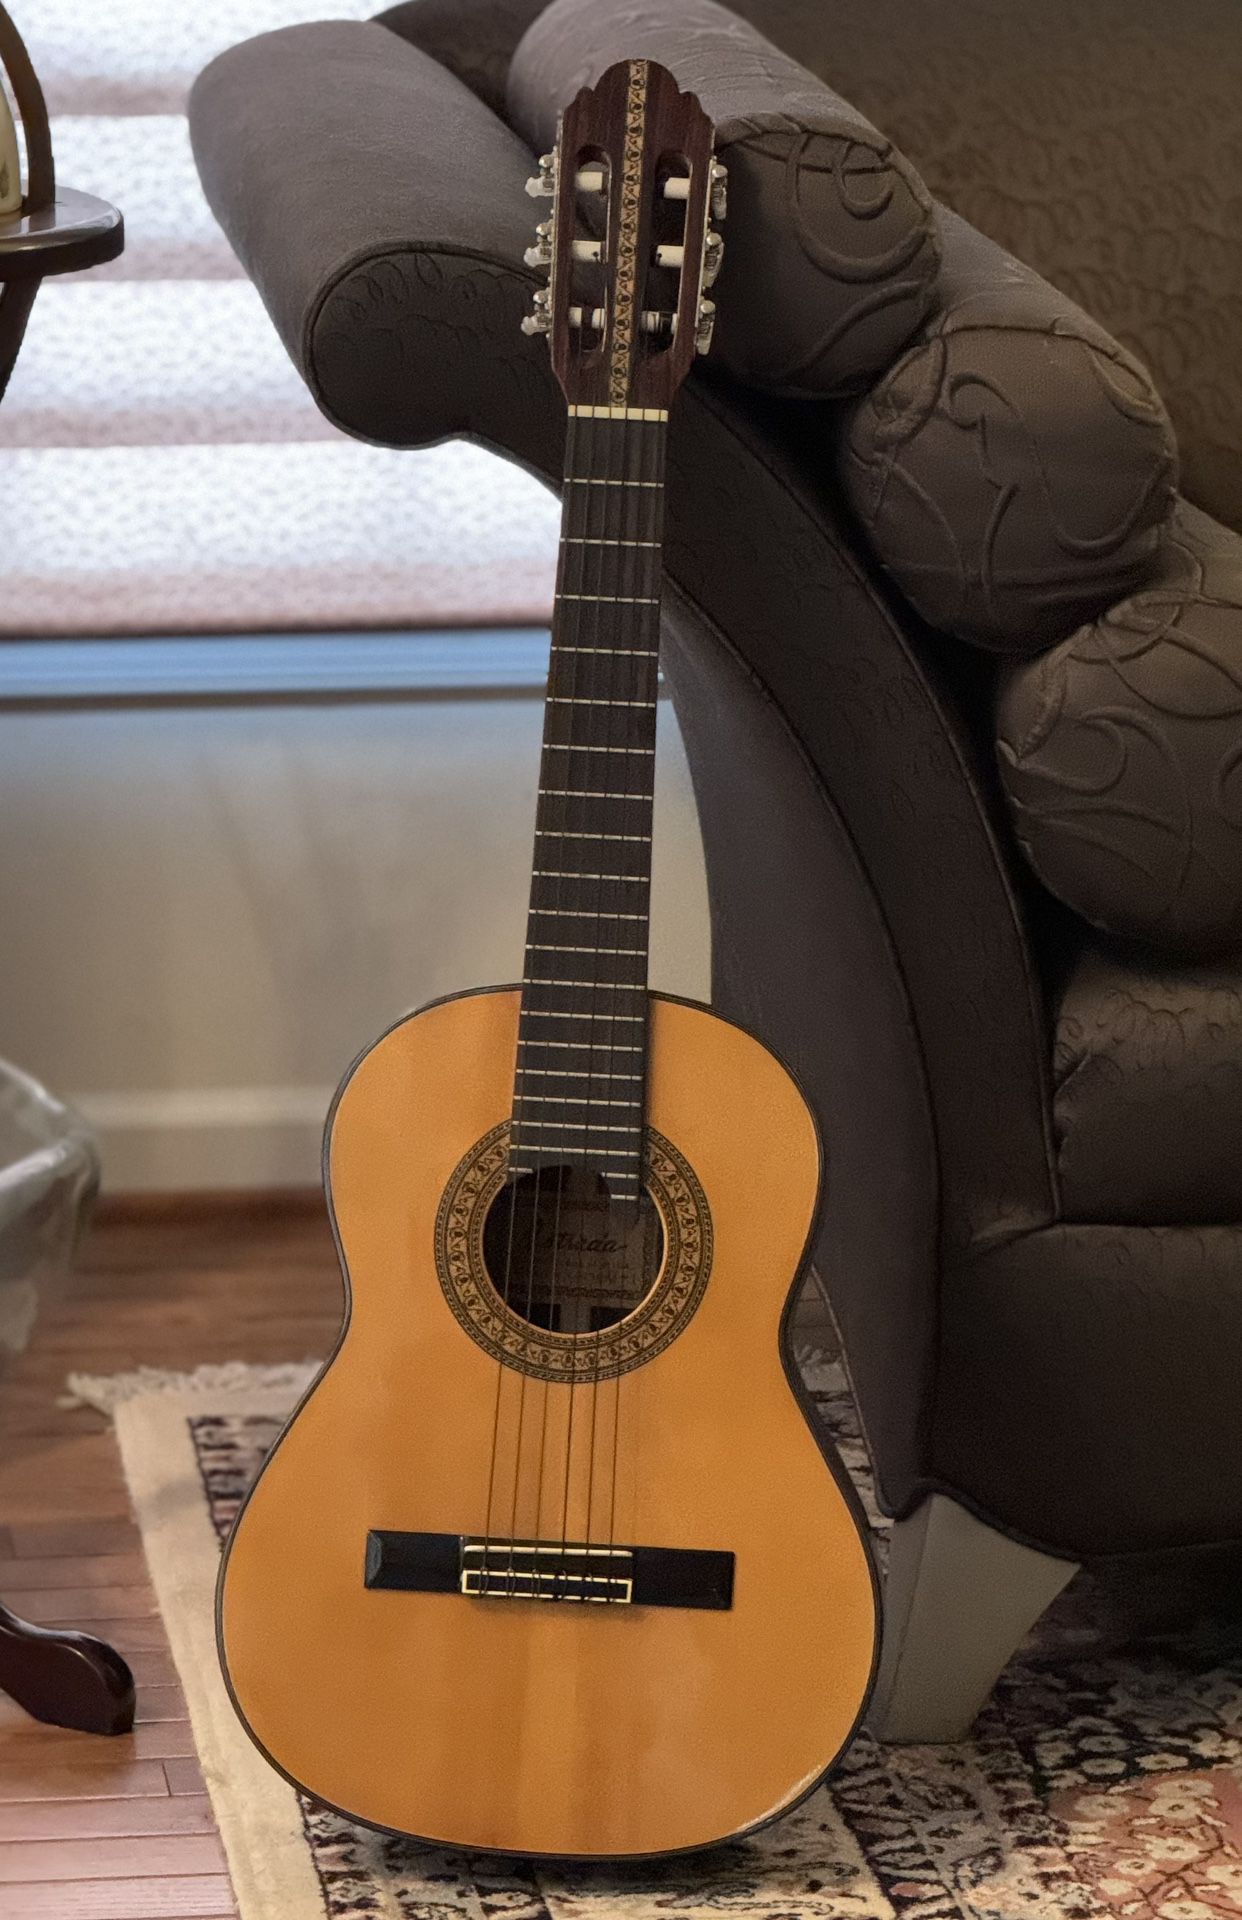 Estrada Classic Acoustic 3/4 Size Guitar with Case. Excellent Condition. 6 Nylon Strings.